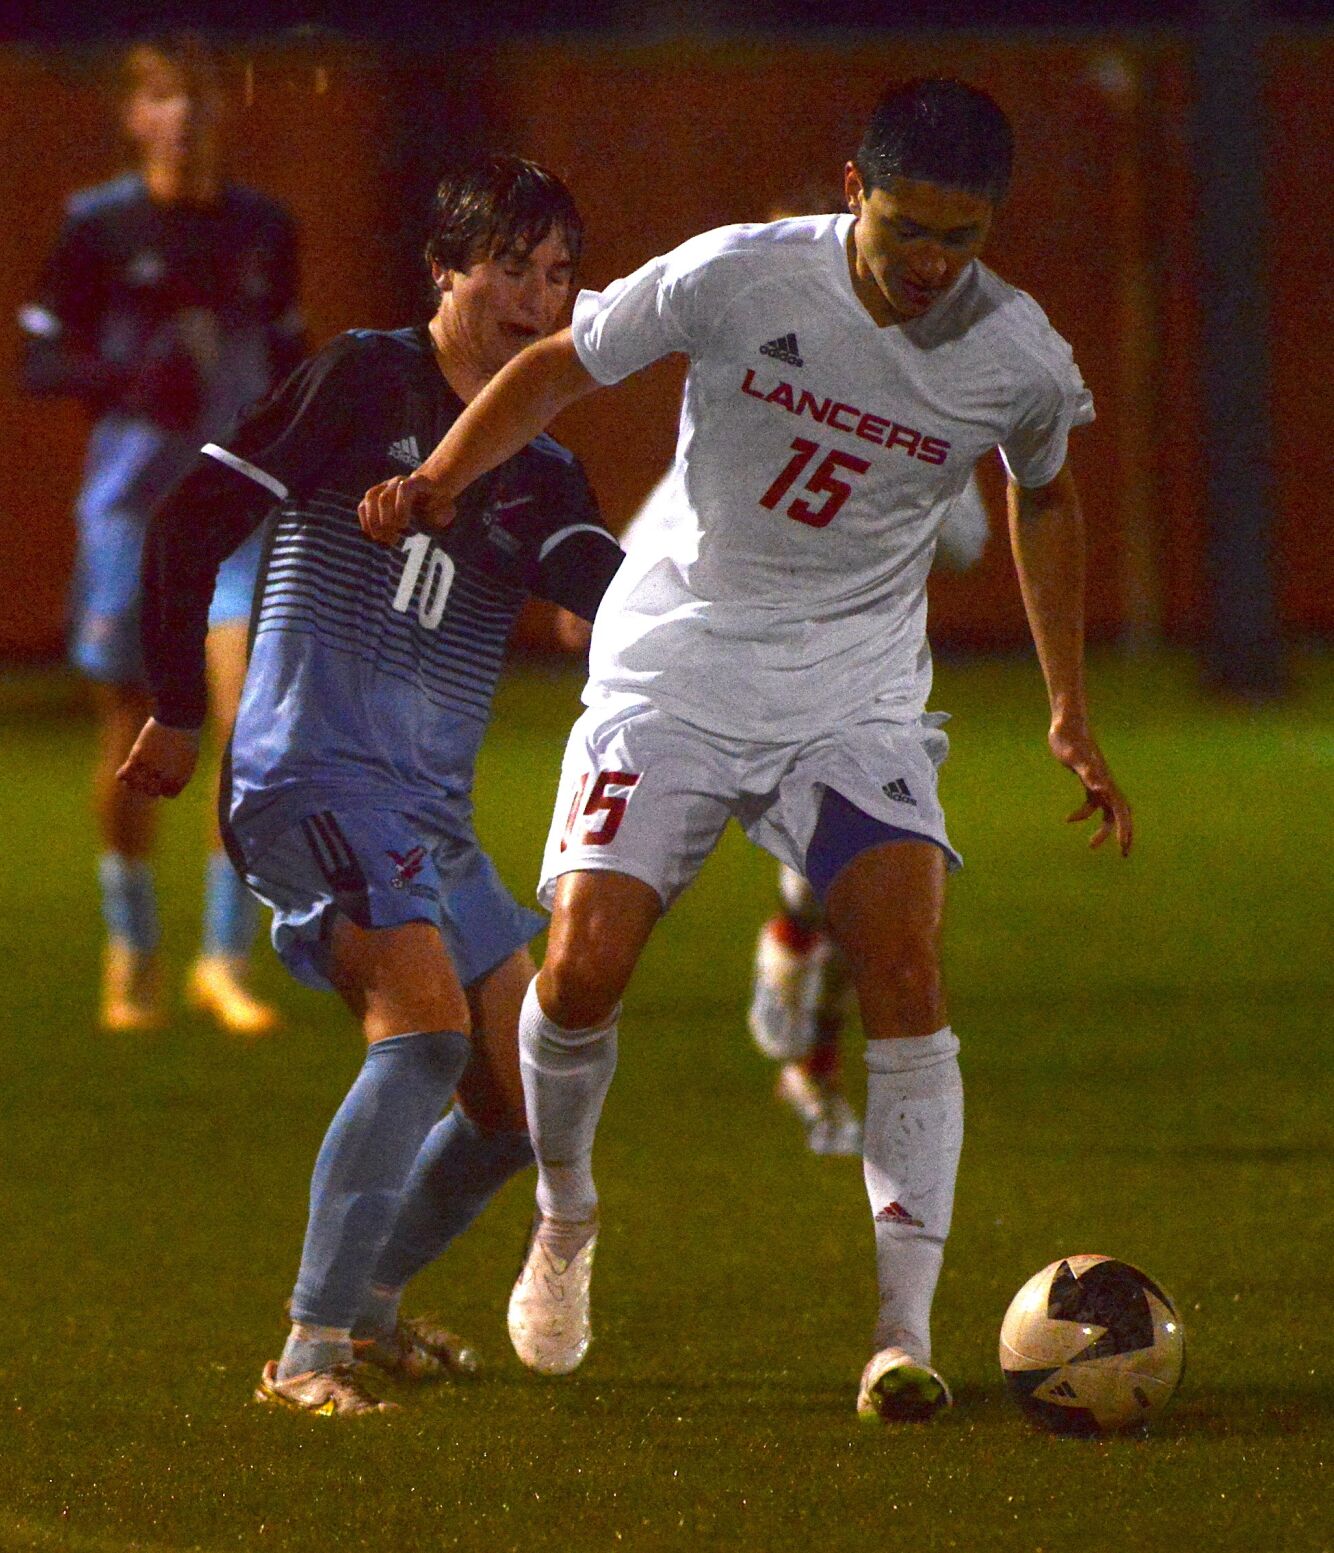 Arrowhead boys soccer team finishes undefeated and prepares for regional opener